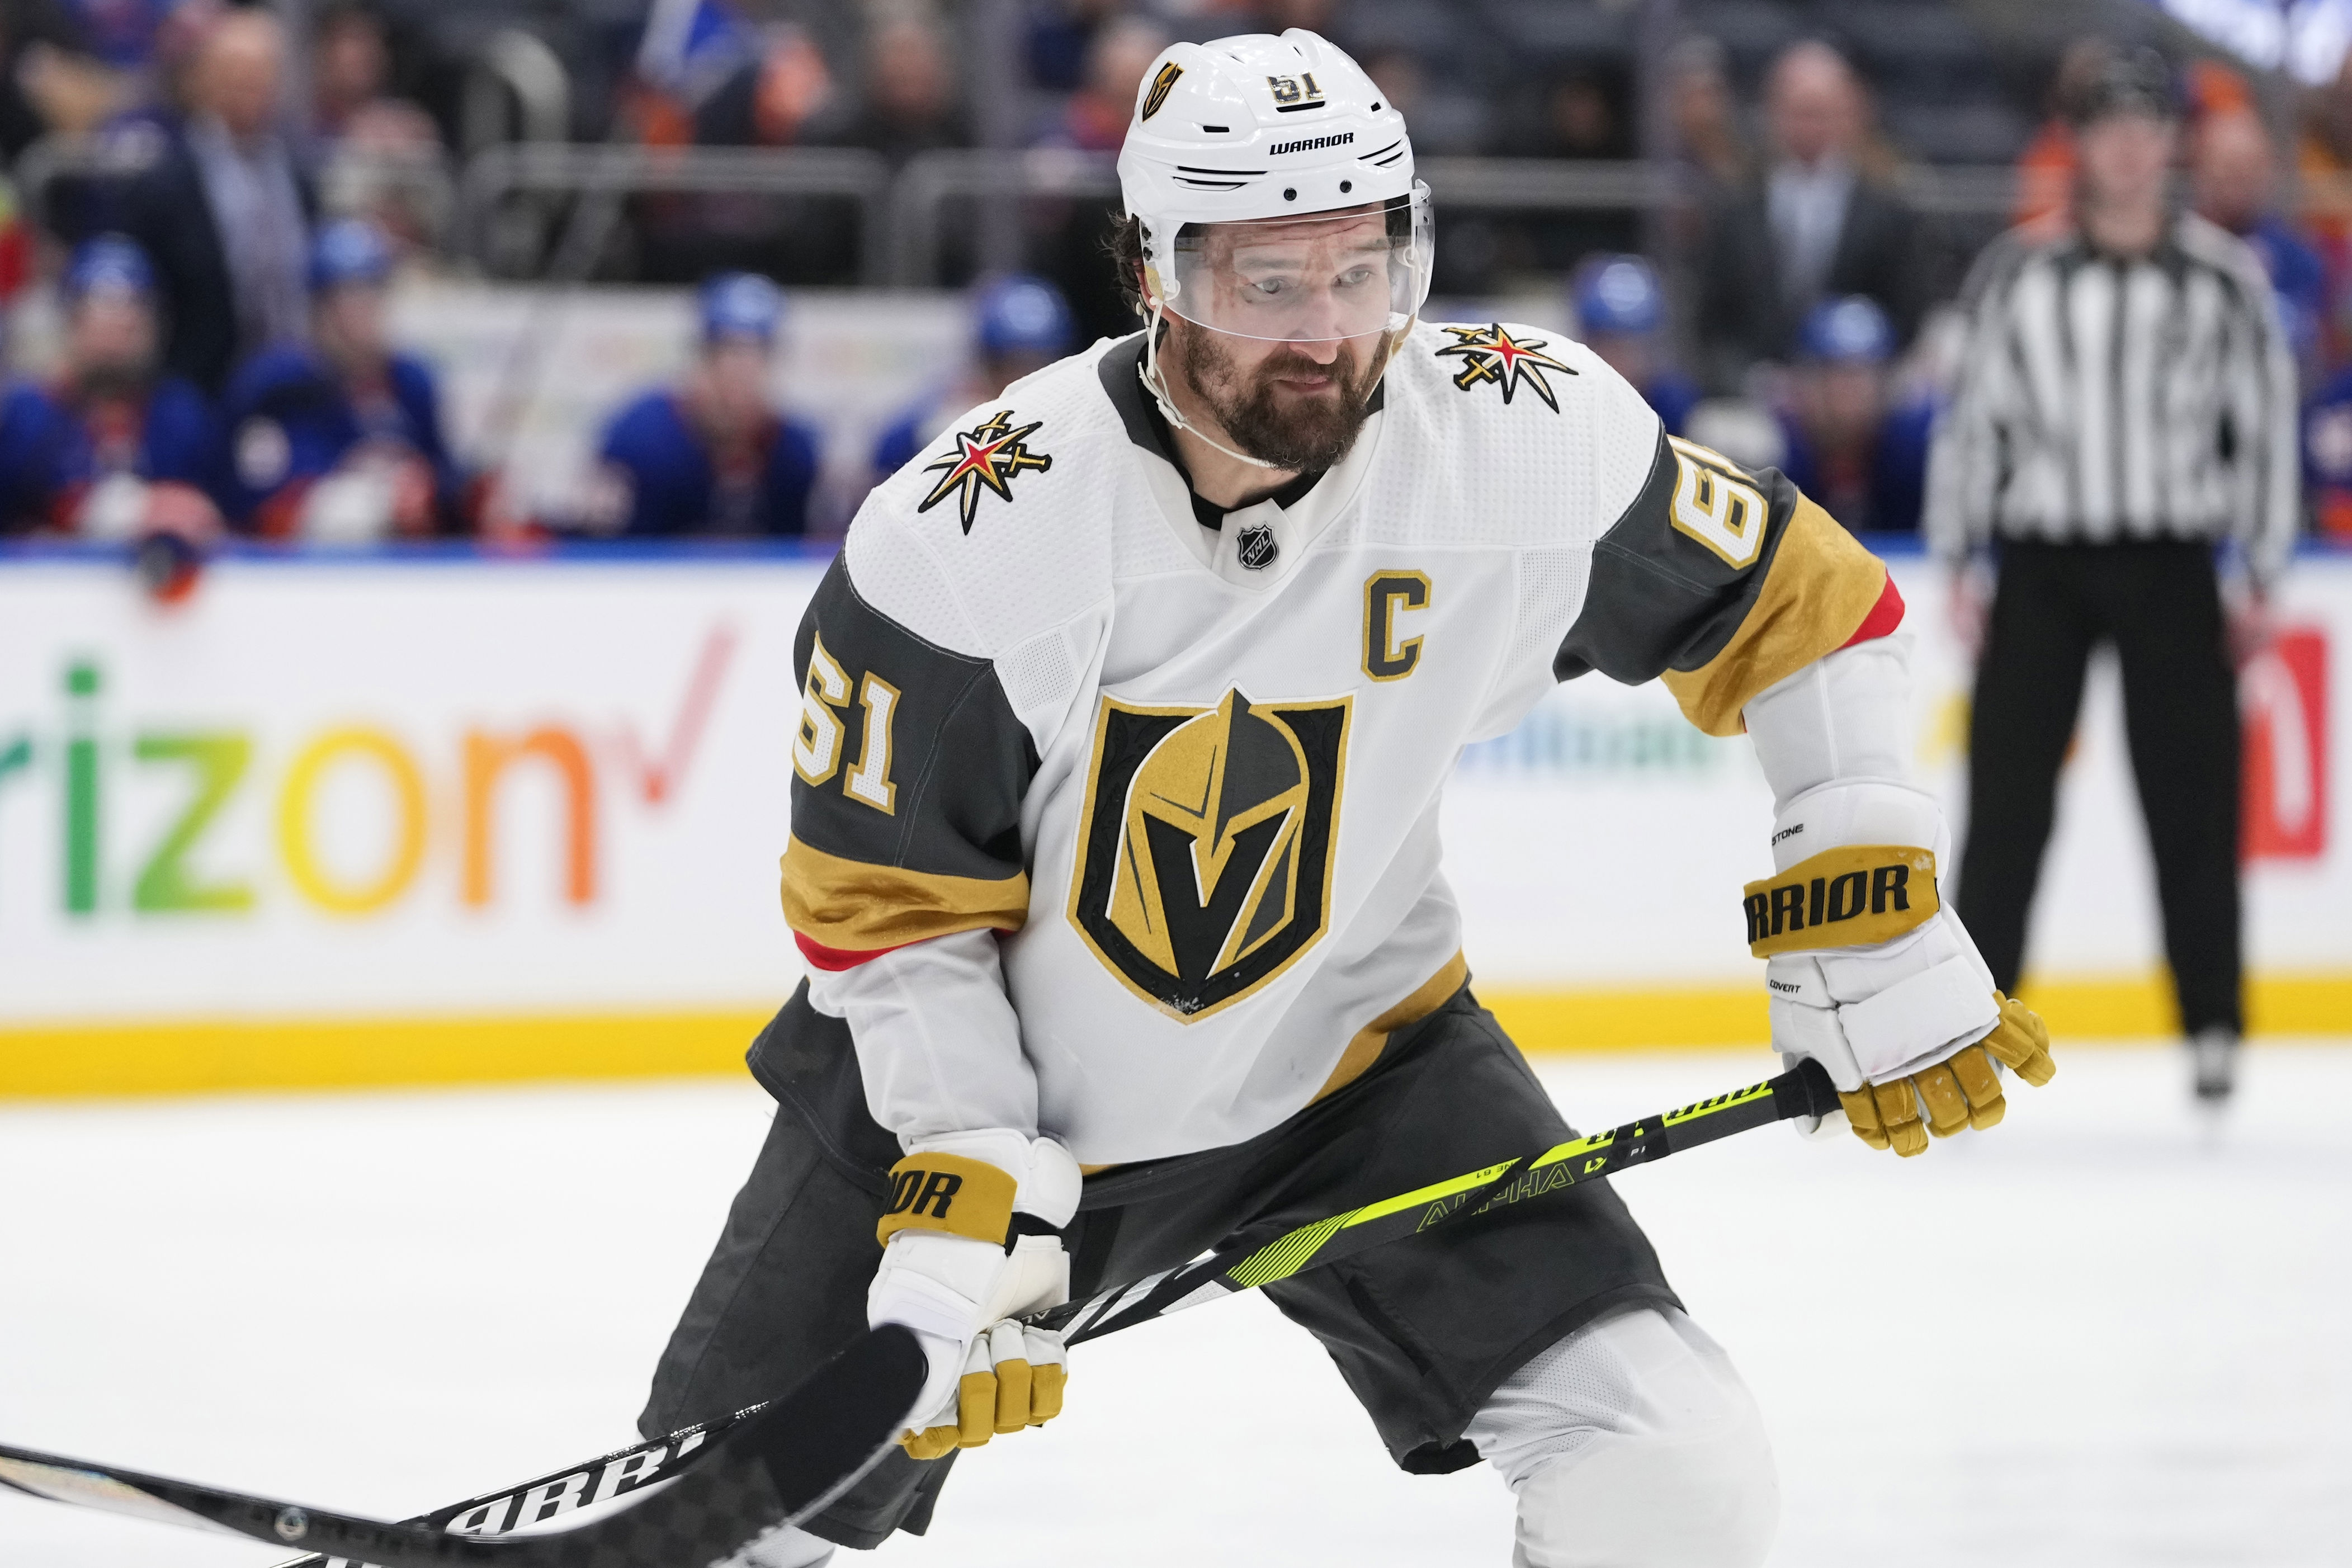 defending cup champion vegas goes with thompson in net for game 1 in dallas; stone scores in return